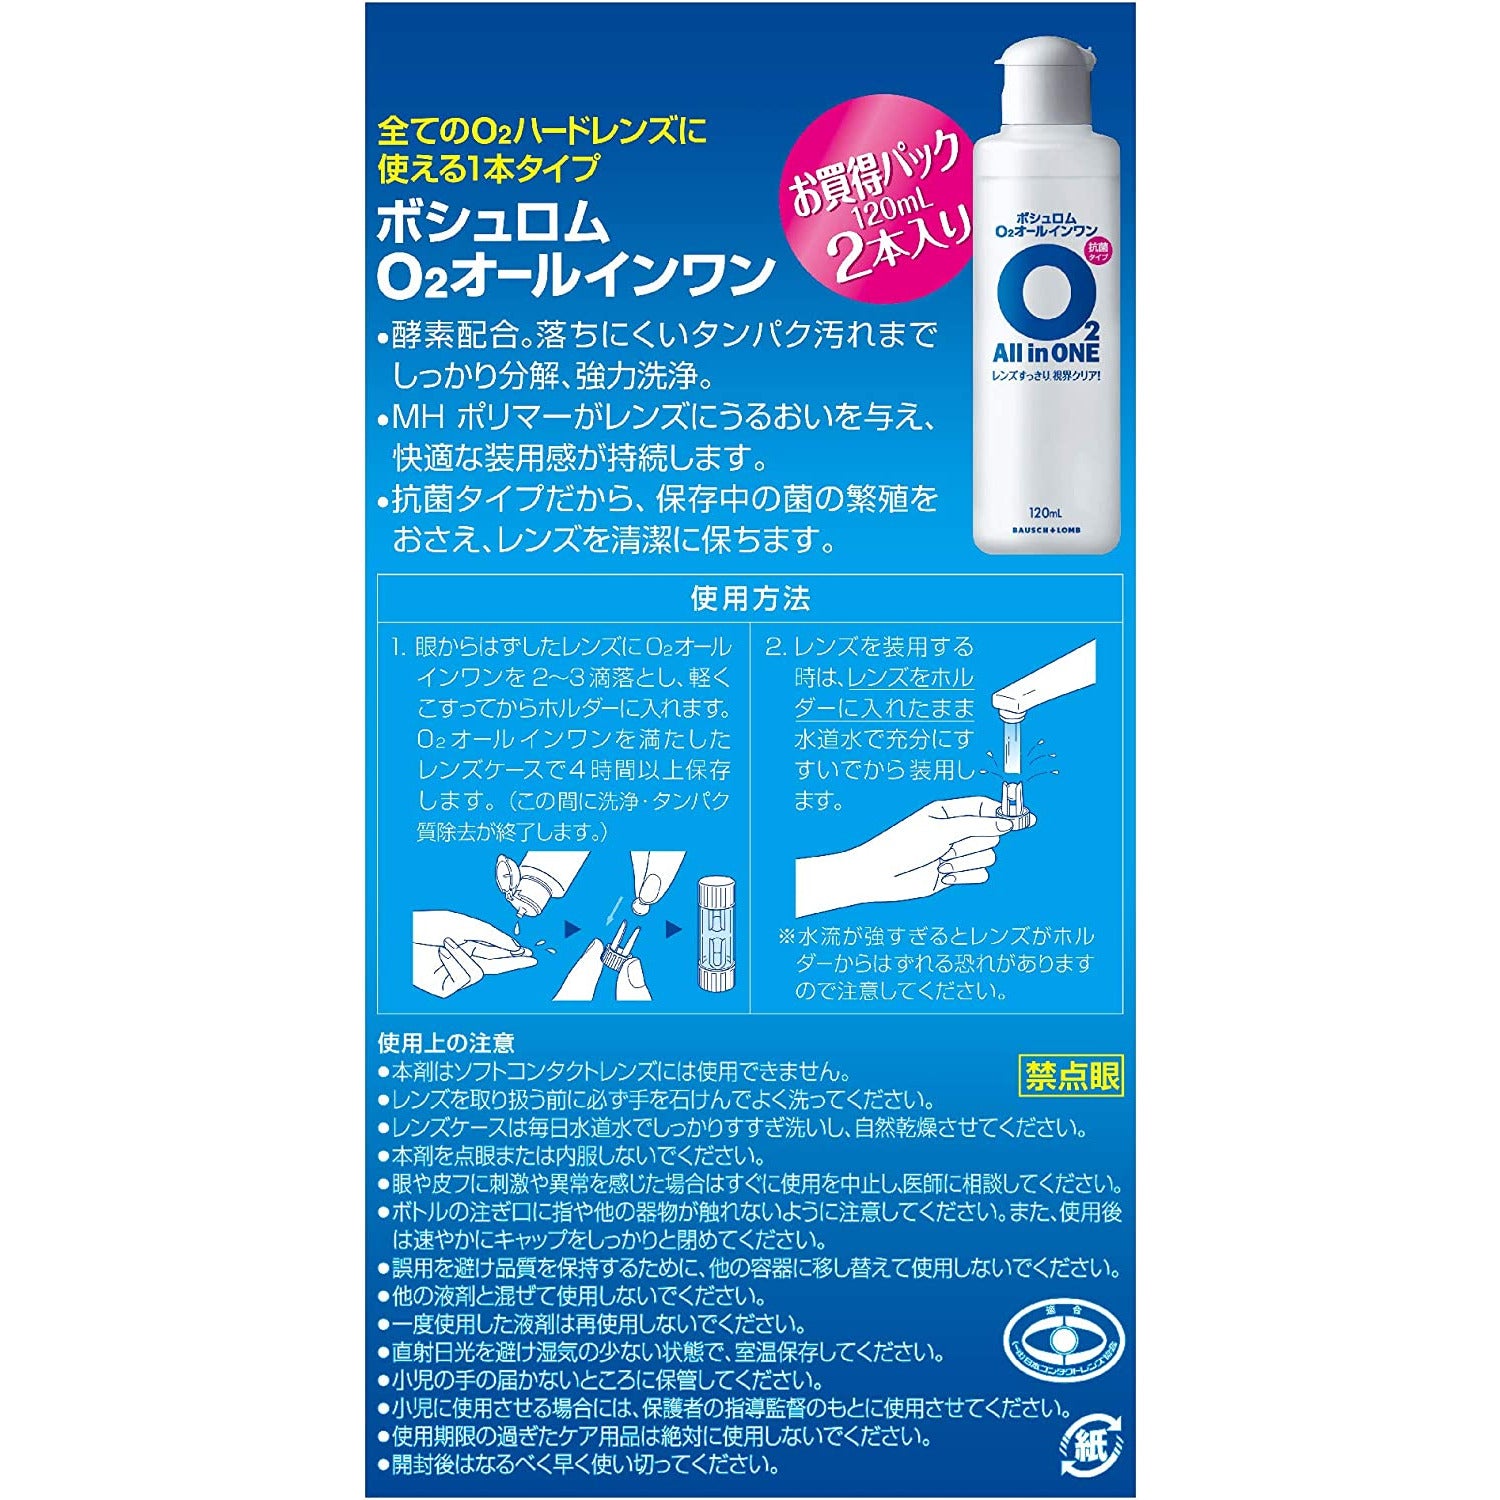 Bausch + Lomb O2 All-in-one 120ml x 2 pack